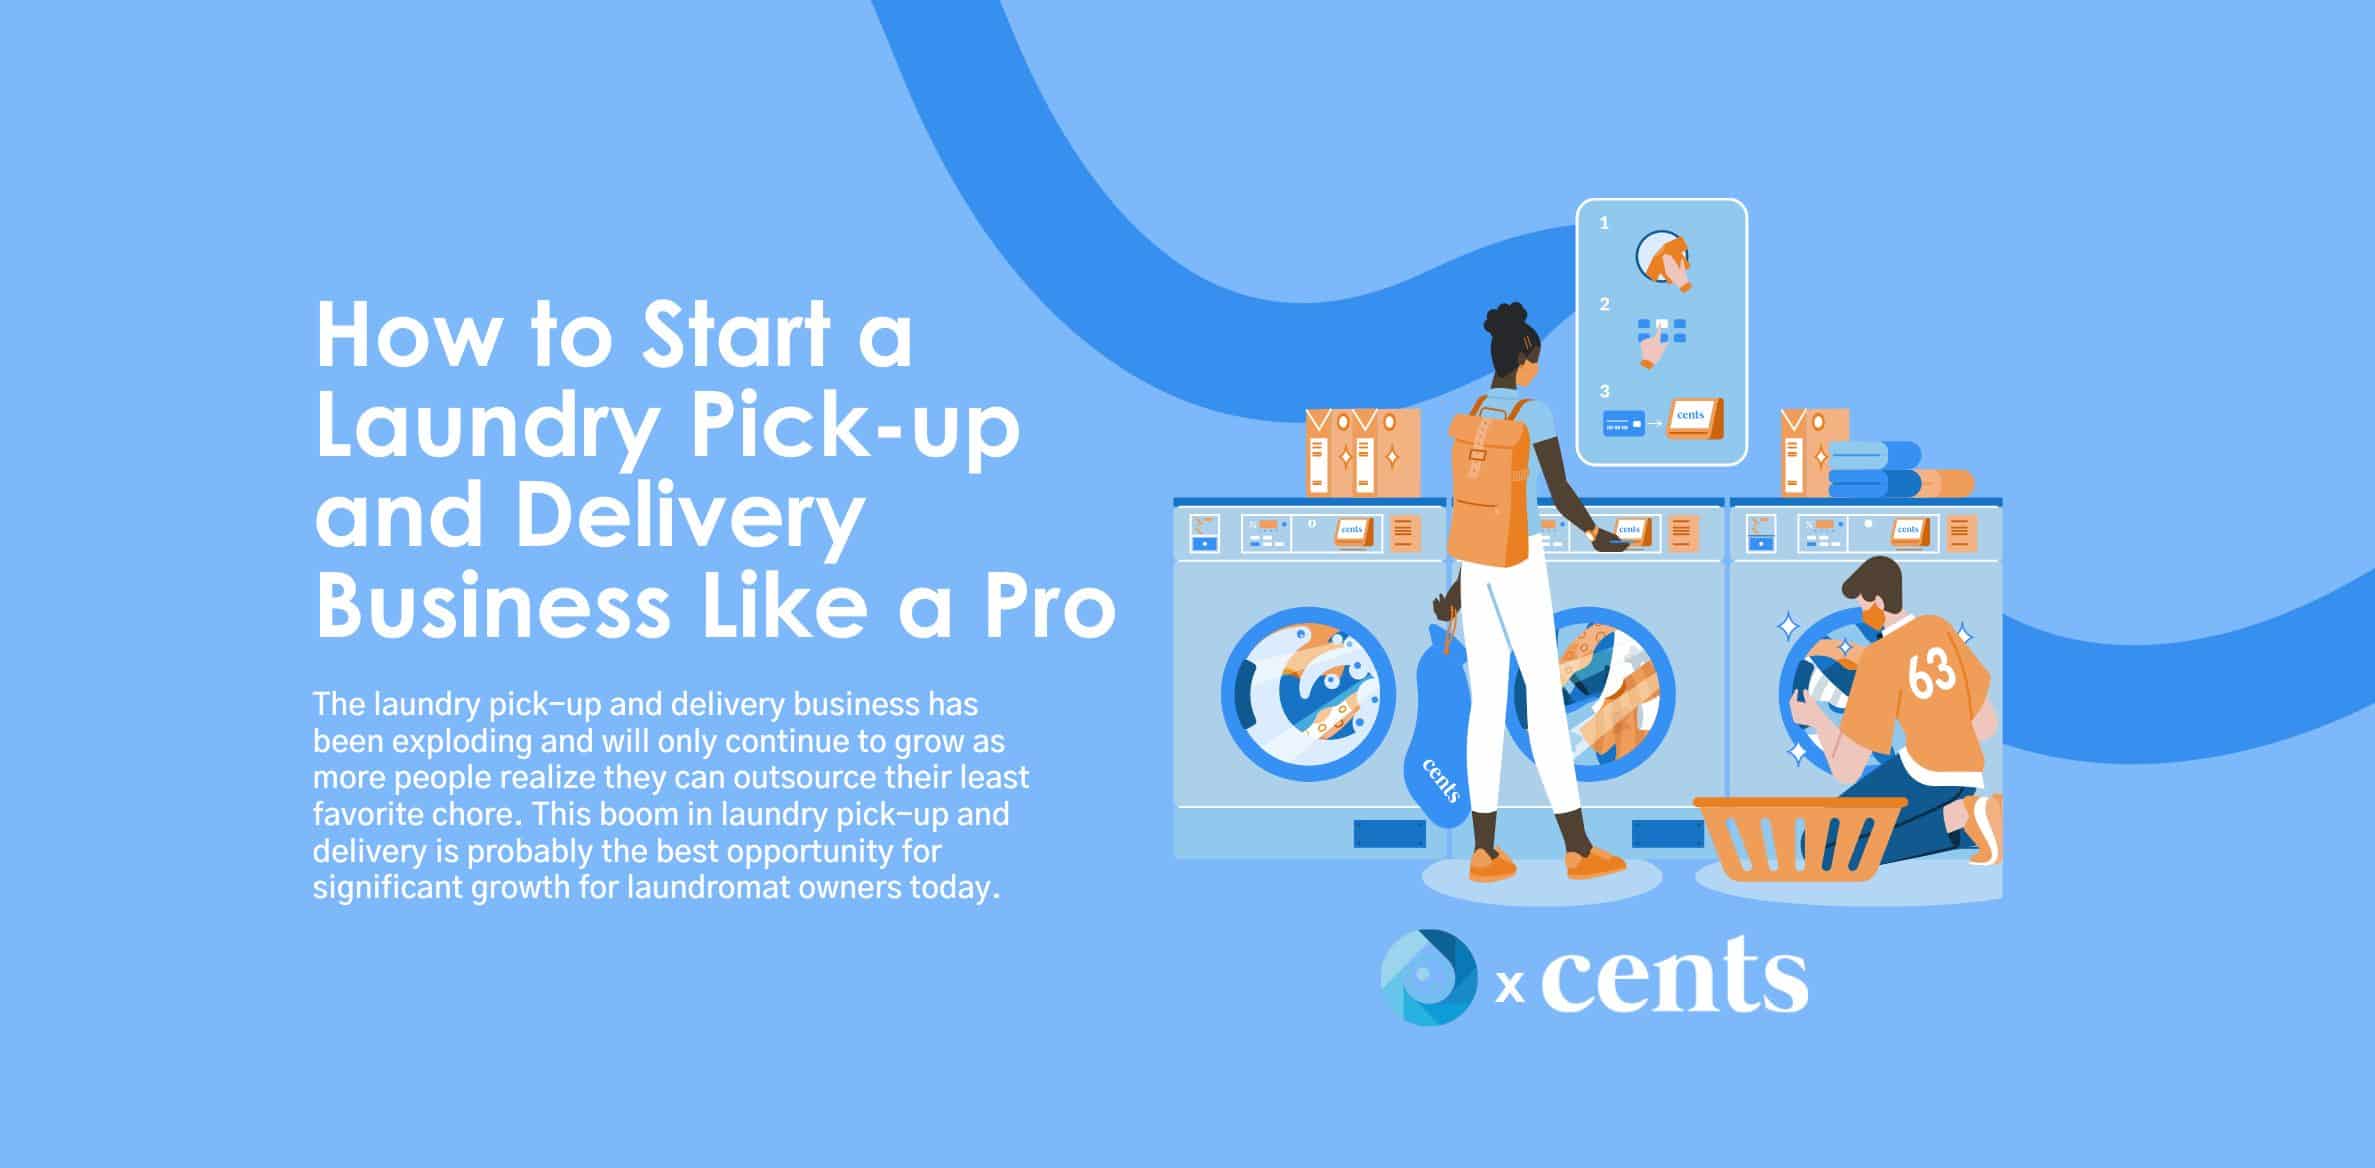 How to Start a Laundry Pick-up and Delivery Business Like a Pro